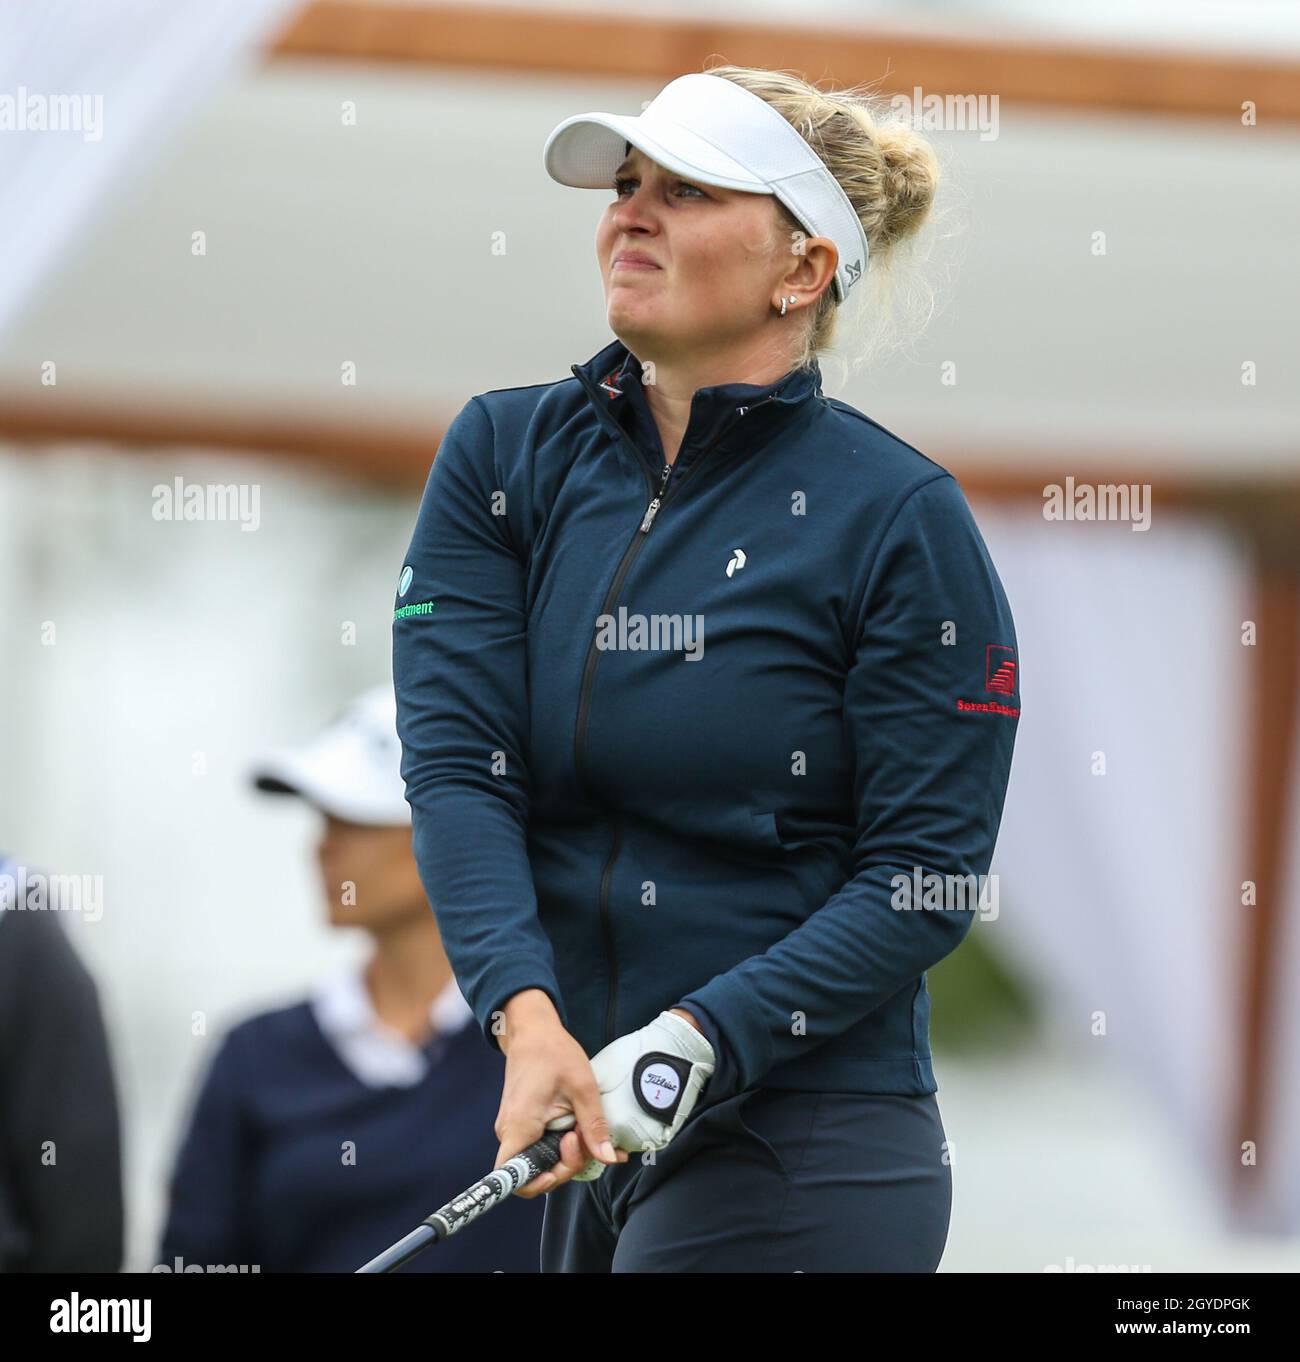 West Caldwell, NJ, USA. 7th Oct, 2021. Nanna Koerstz Madsen of Denmark tees off during the first round of the LPGA Cognizant Founders Cup at the Mountain Ridge Golf Course in West Caldwell, NJ. Mike Langish/Cal Sport Media. Credit: csm/Alamy Live News Stock Photo